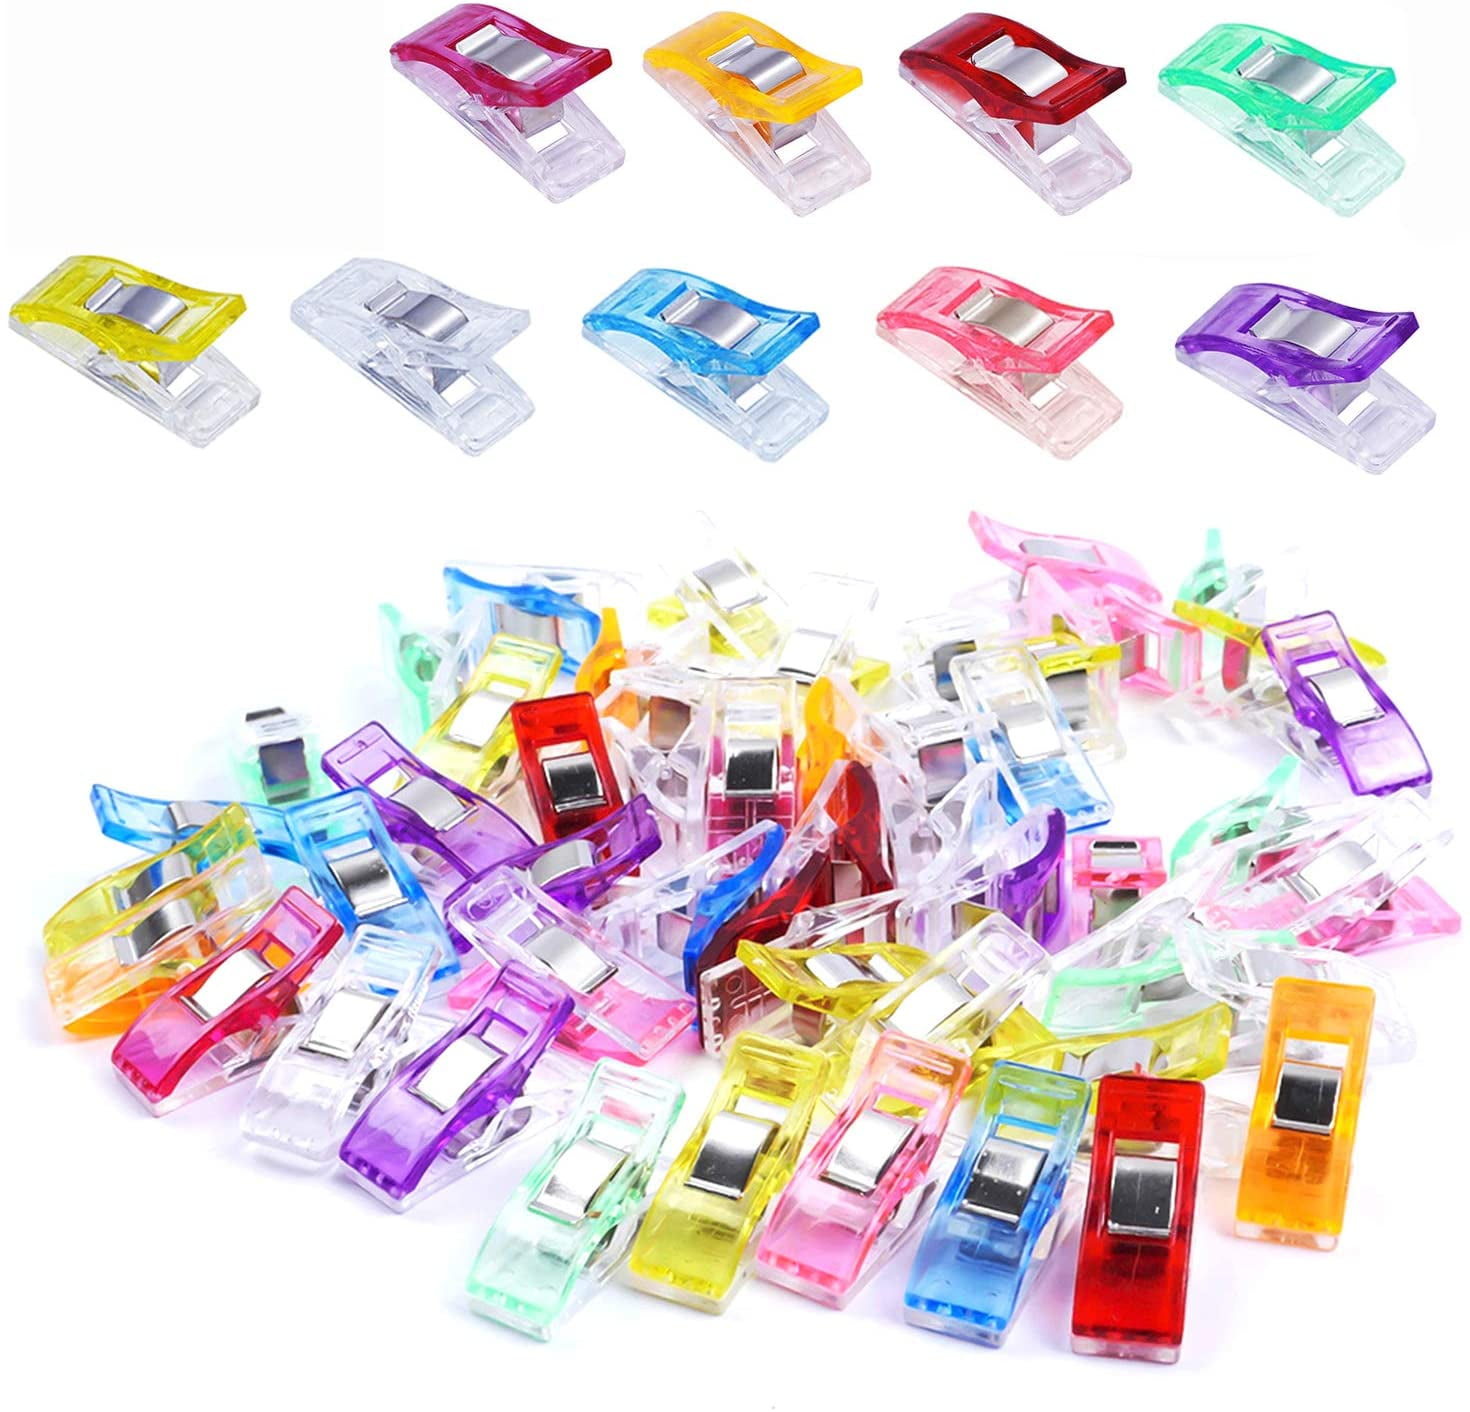 50 Pack-1.1 0.6 Sewing Clips Multi-Color for Sewing Craft Clamps,Crafting,Crochet and Knitting,All Purpose Clips for Quilting Binding Clips,Fabric Clips,Paper Clips,Blinder Clips Red 0.4 